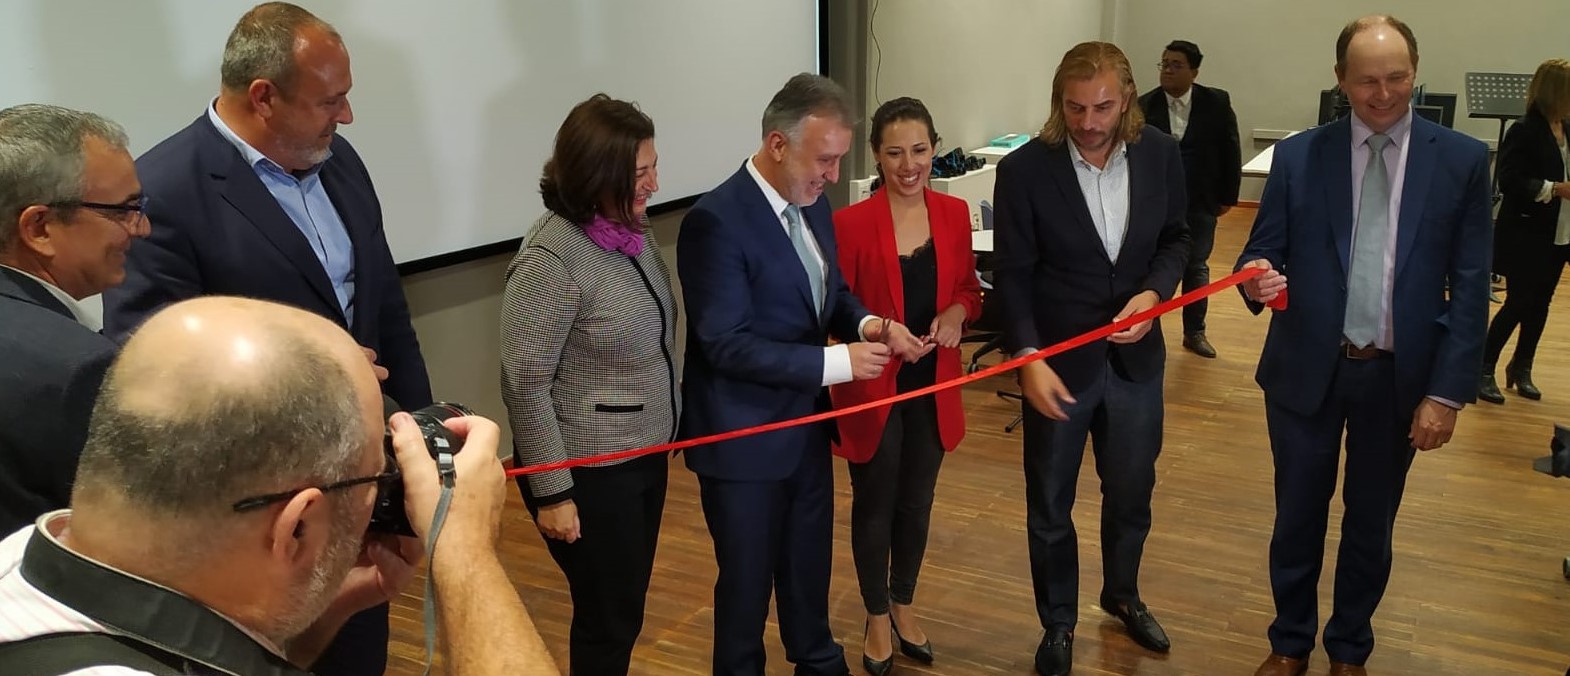 EON Reality and the Community of Canary Islands Inaugurate the First Classroom 3.0 Campus in Spain